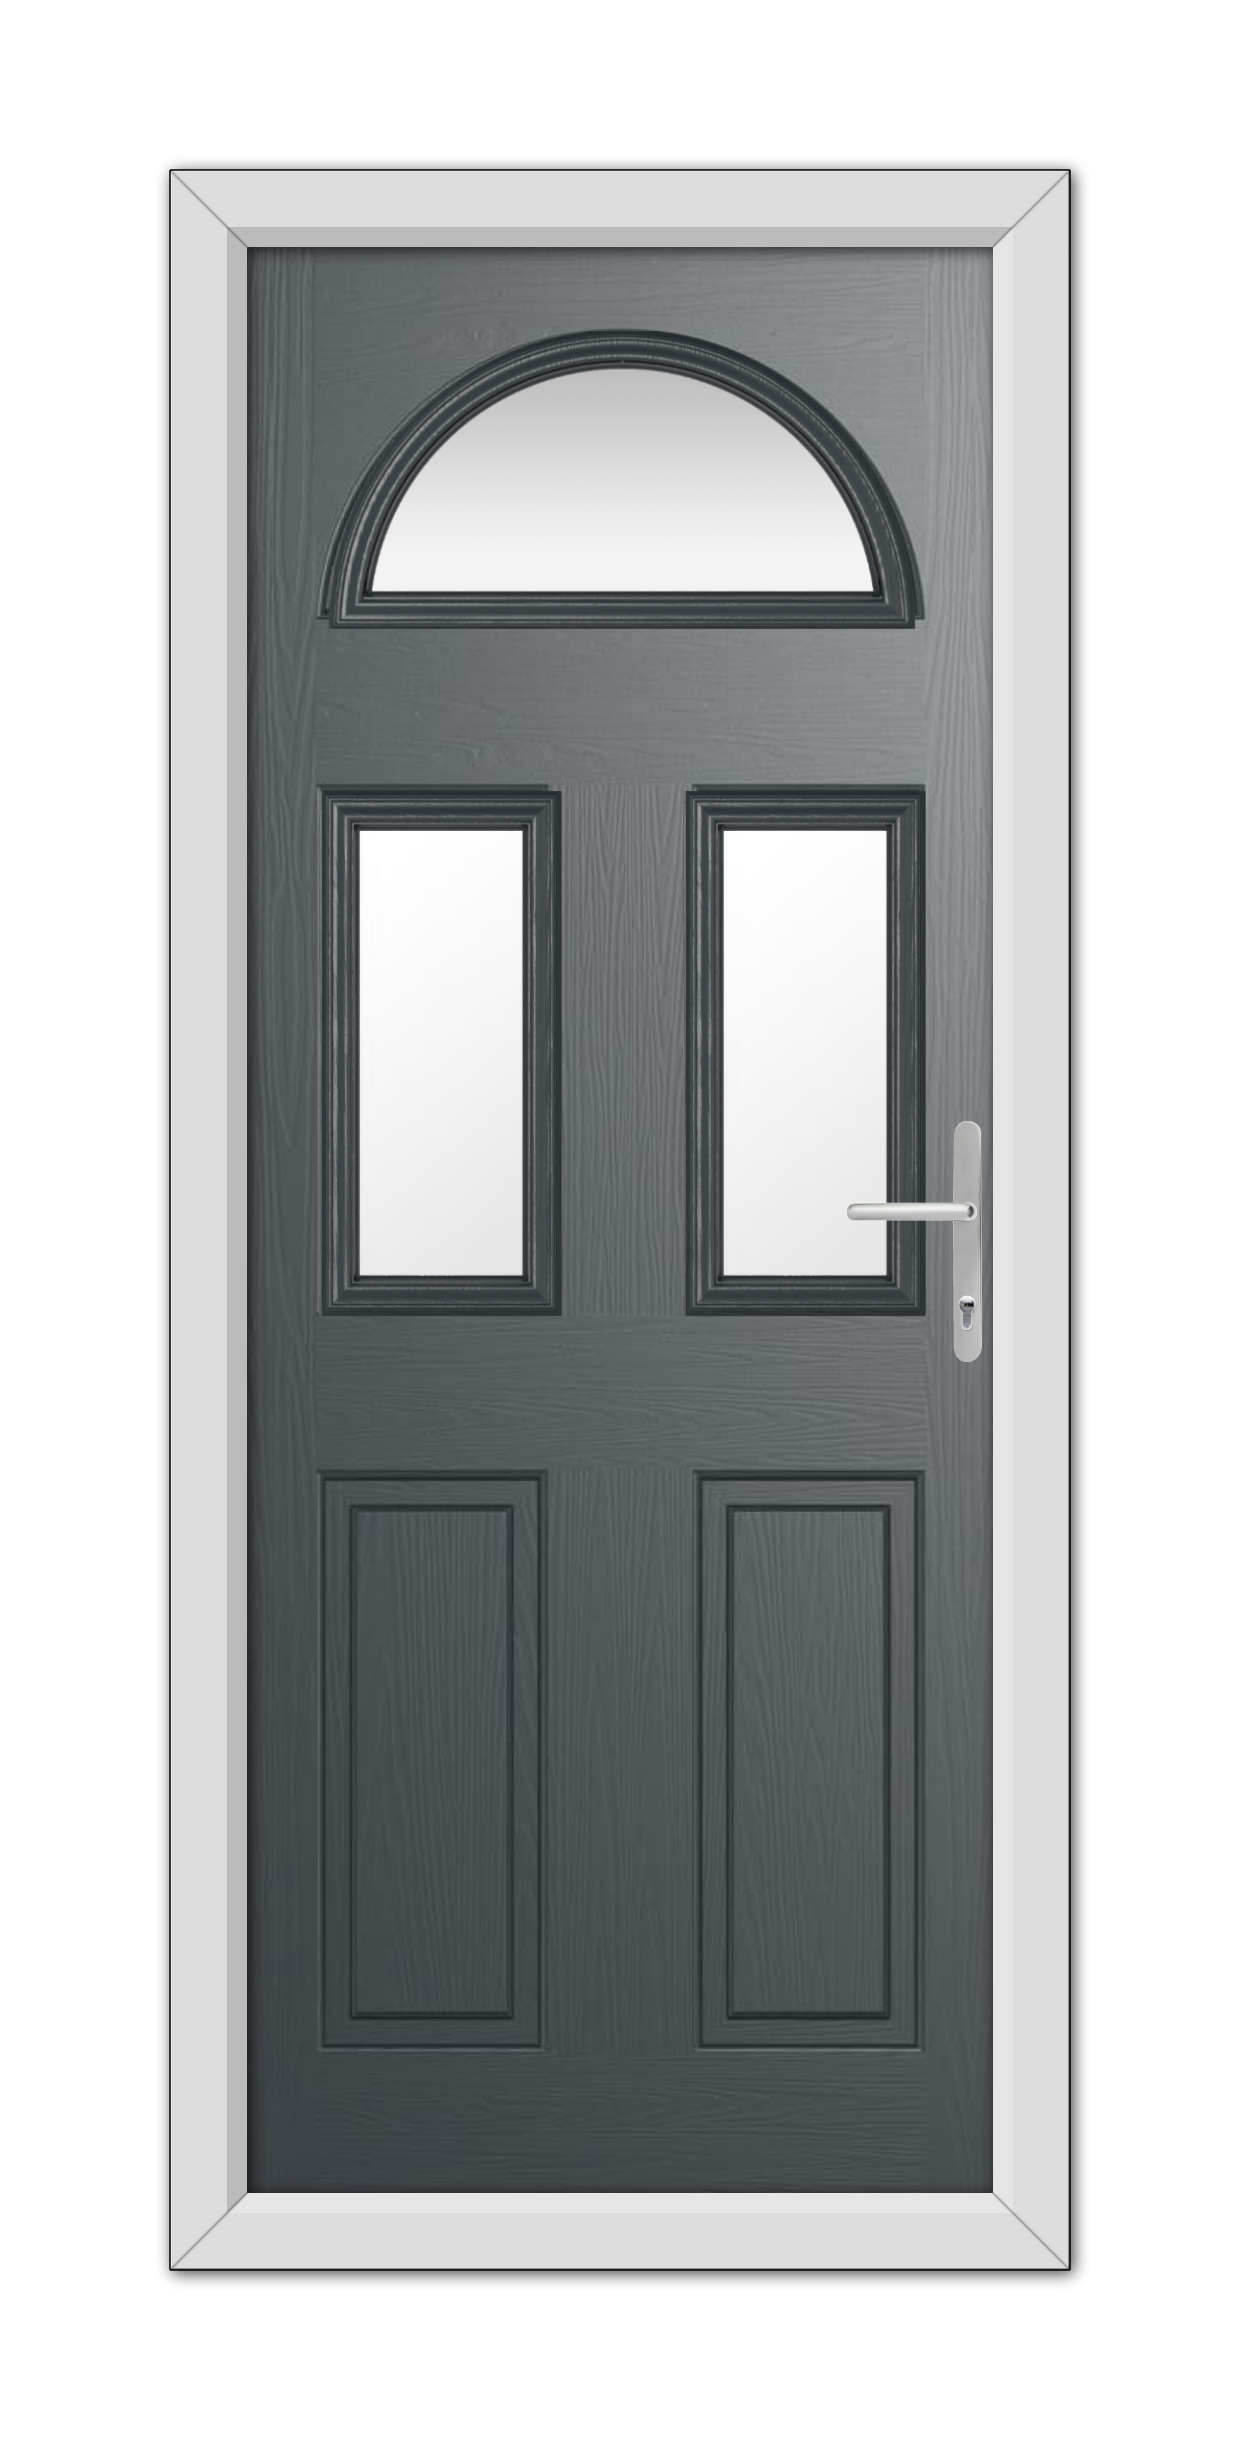 A modern Anthracite Grey Winslow 3 Composite Door 48mm Timber Core with a semi-circular window at the top and two square windows, featuring a silver handle, set within a white frame.